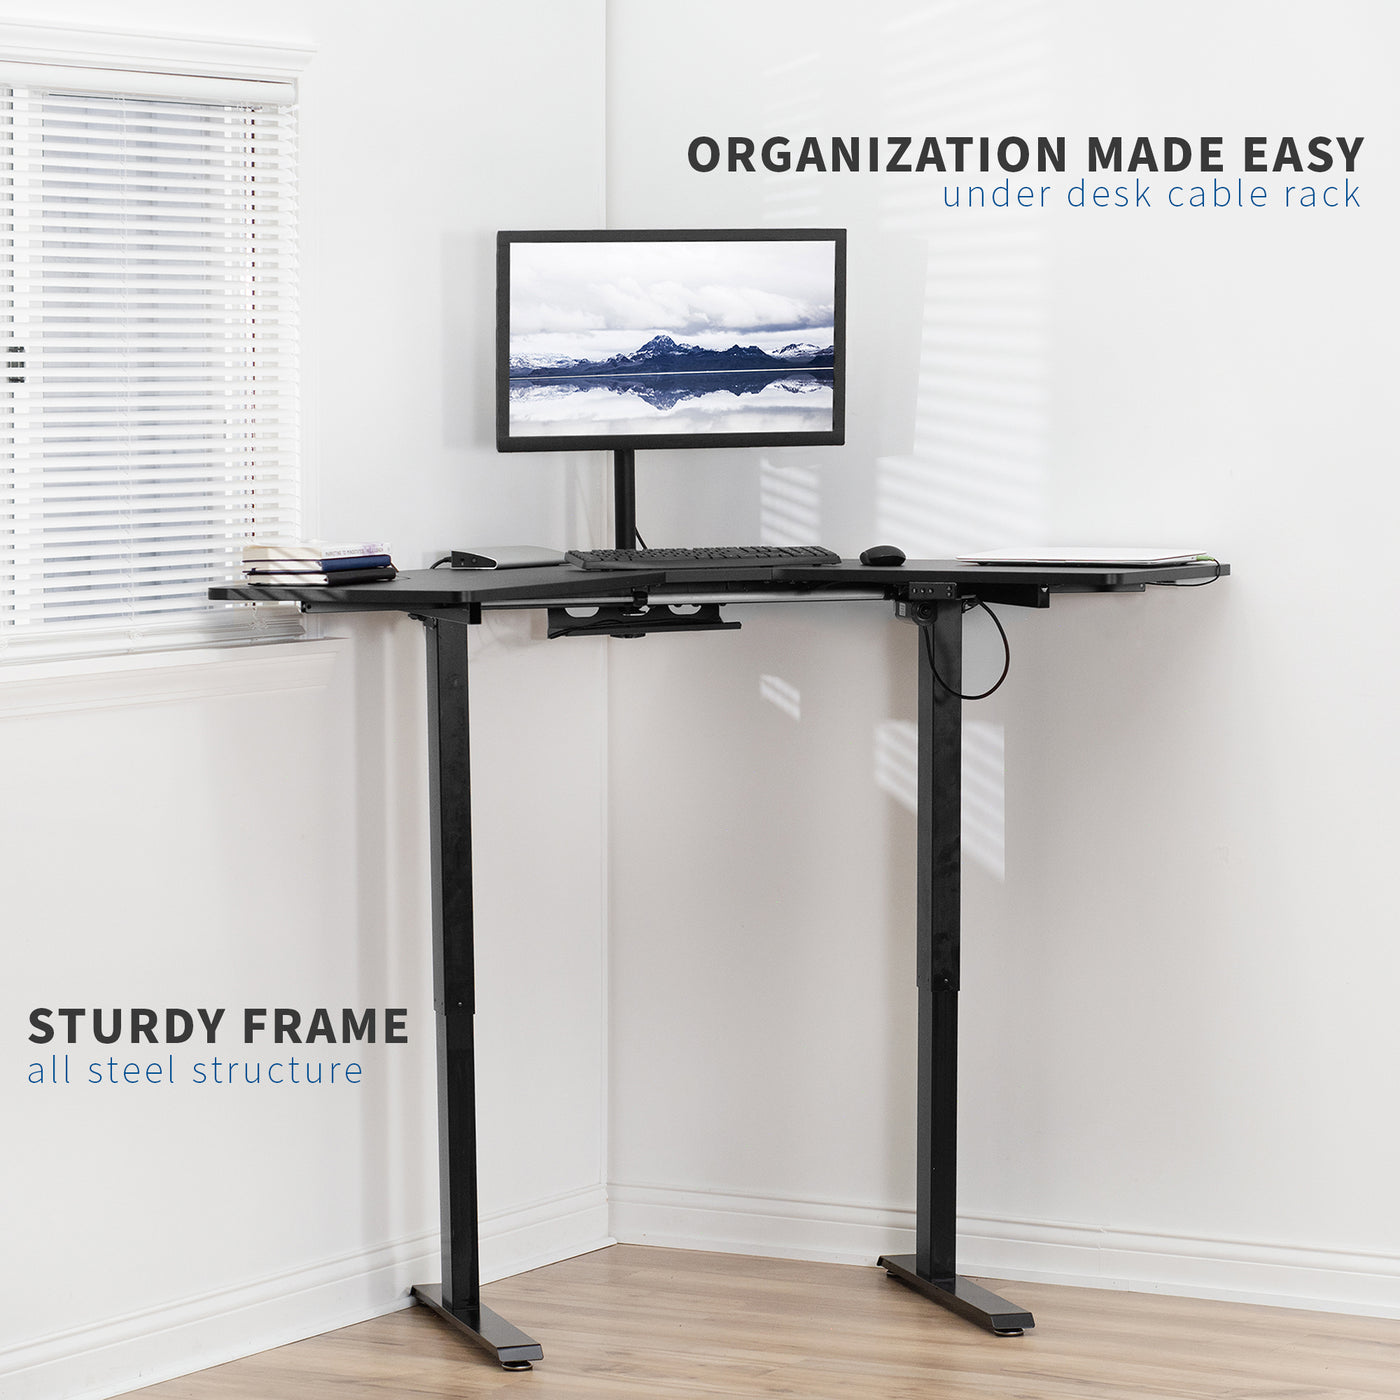 Electric height adjustable Corner desk with a sturdy frame.